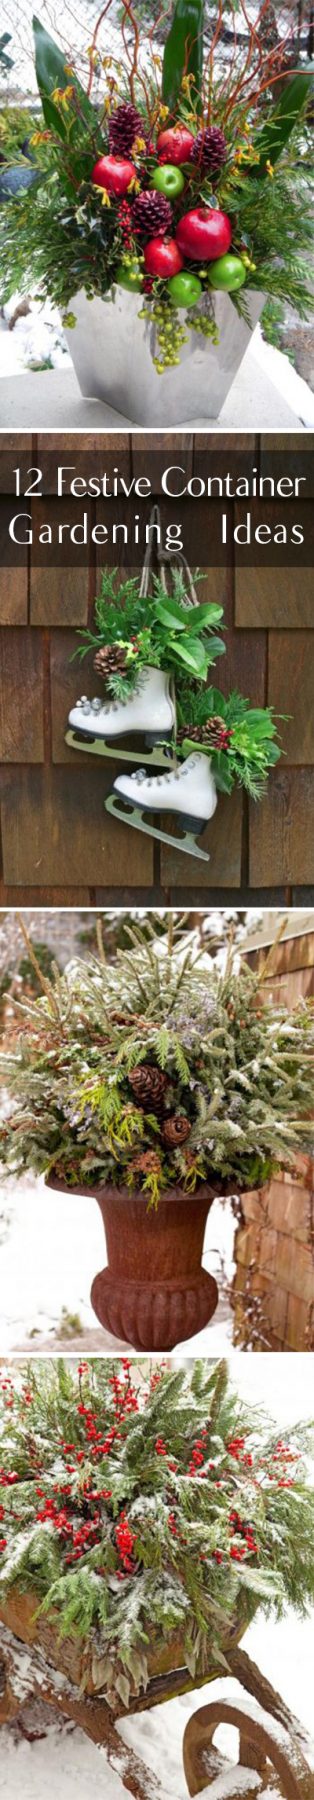 12 Festive Container Gardening Ideas ~ Bless My Weeds